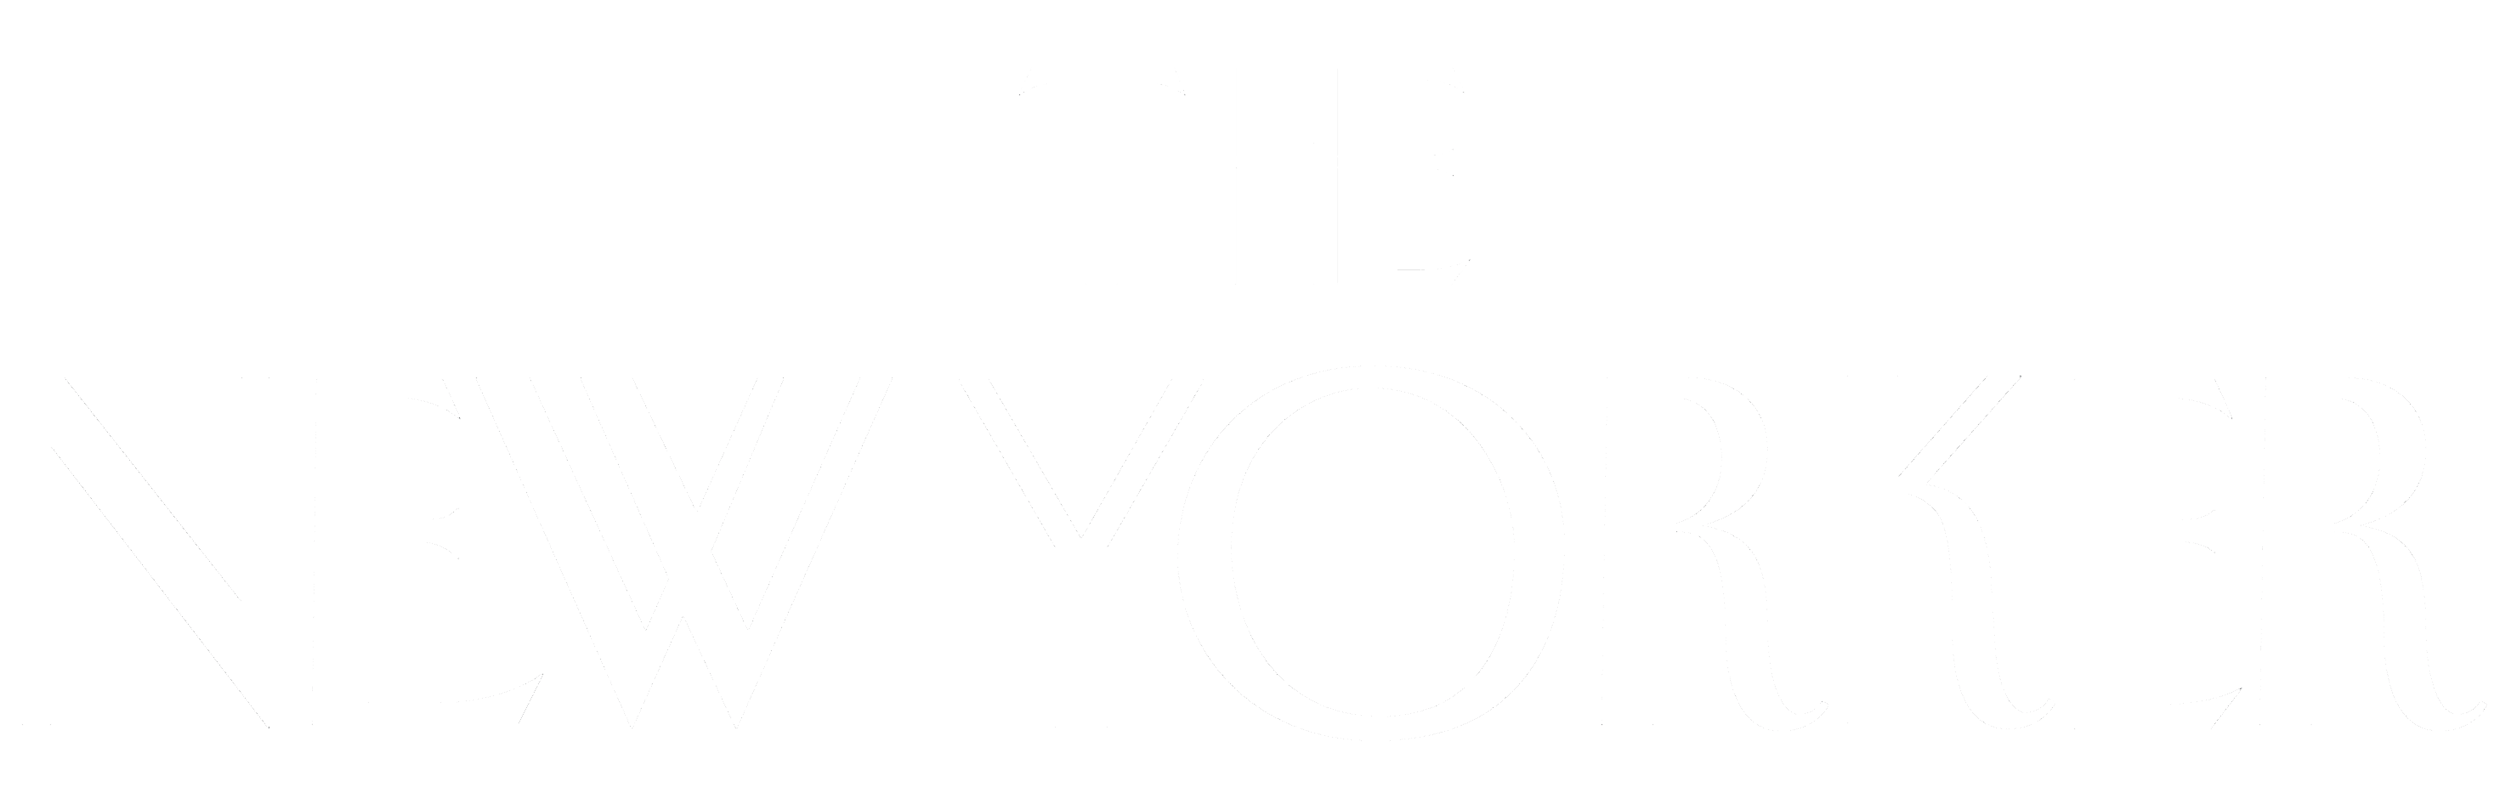 The_New_Yorker_logo.png